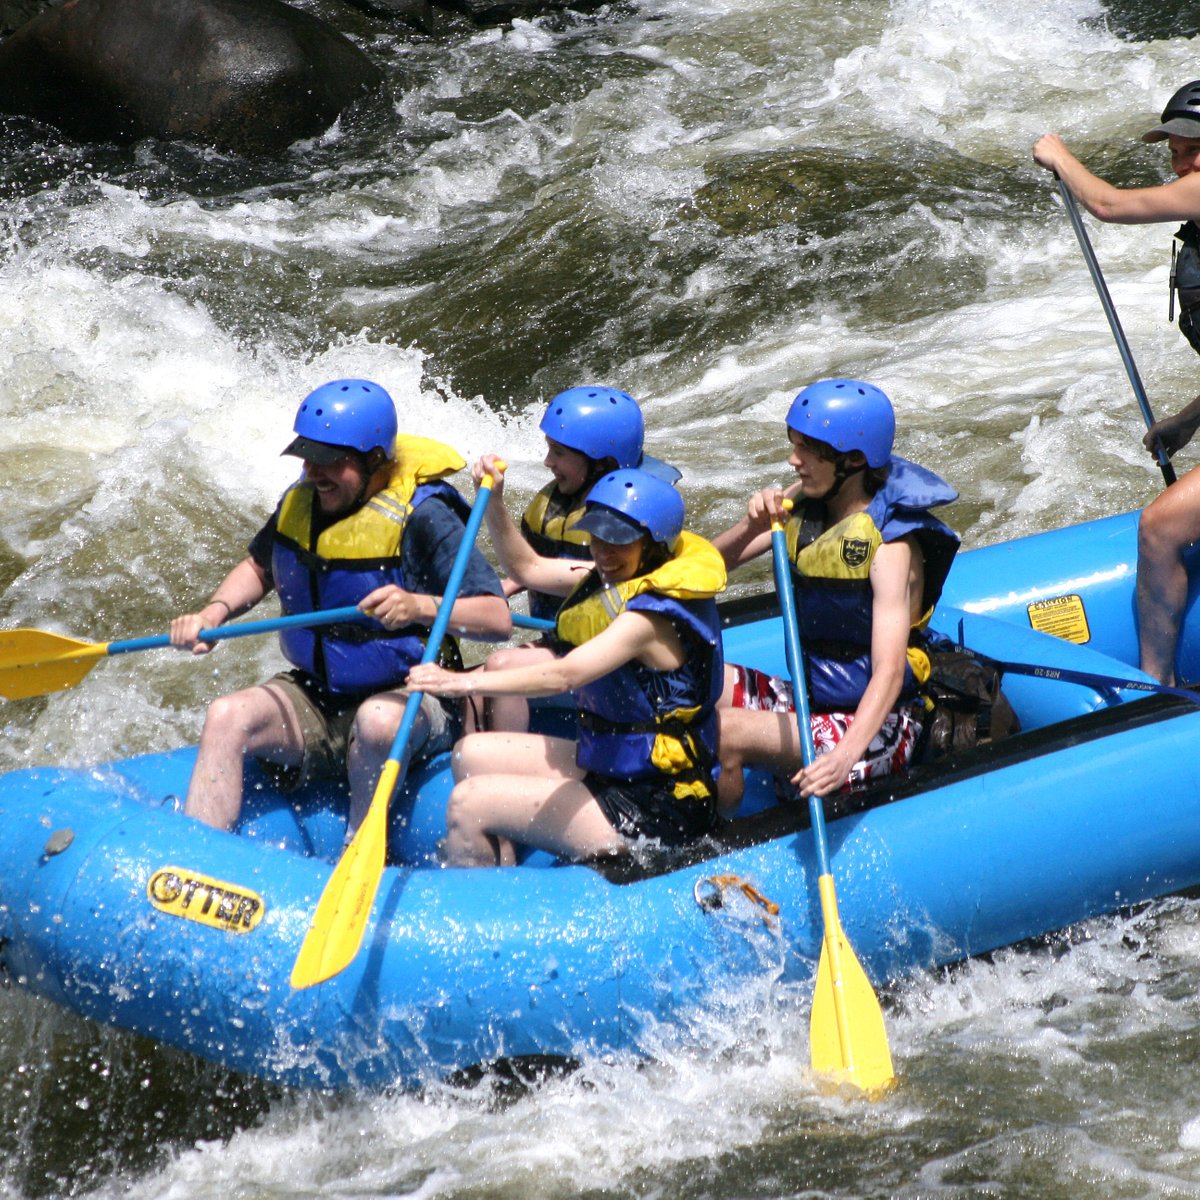 Appalachian Outdoors Whitewater Rafting (Pigeon Forge) - All You Need ...